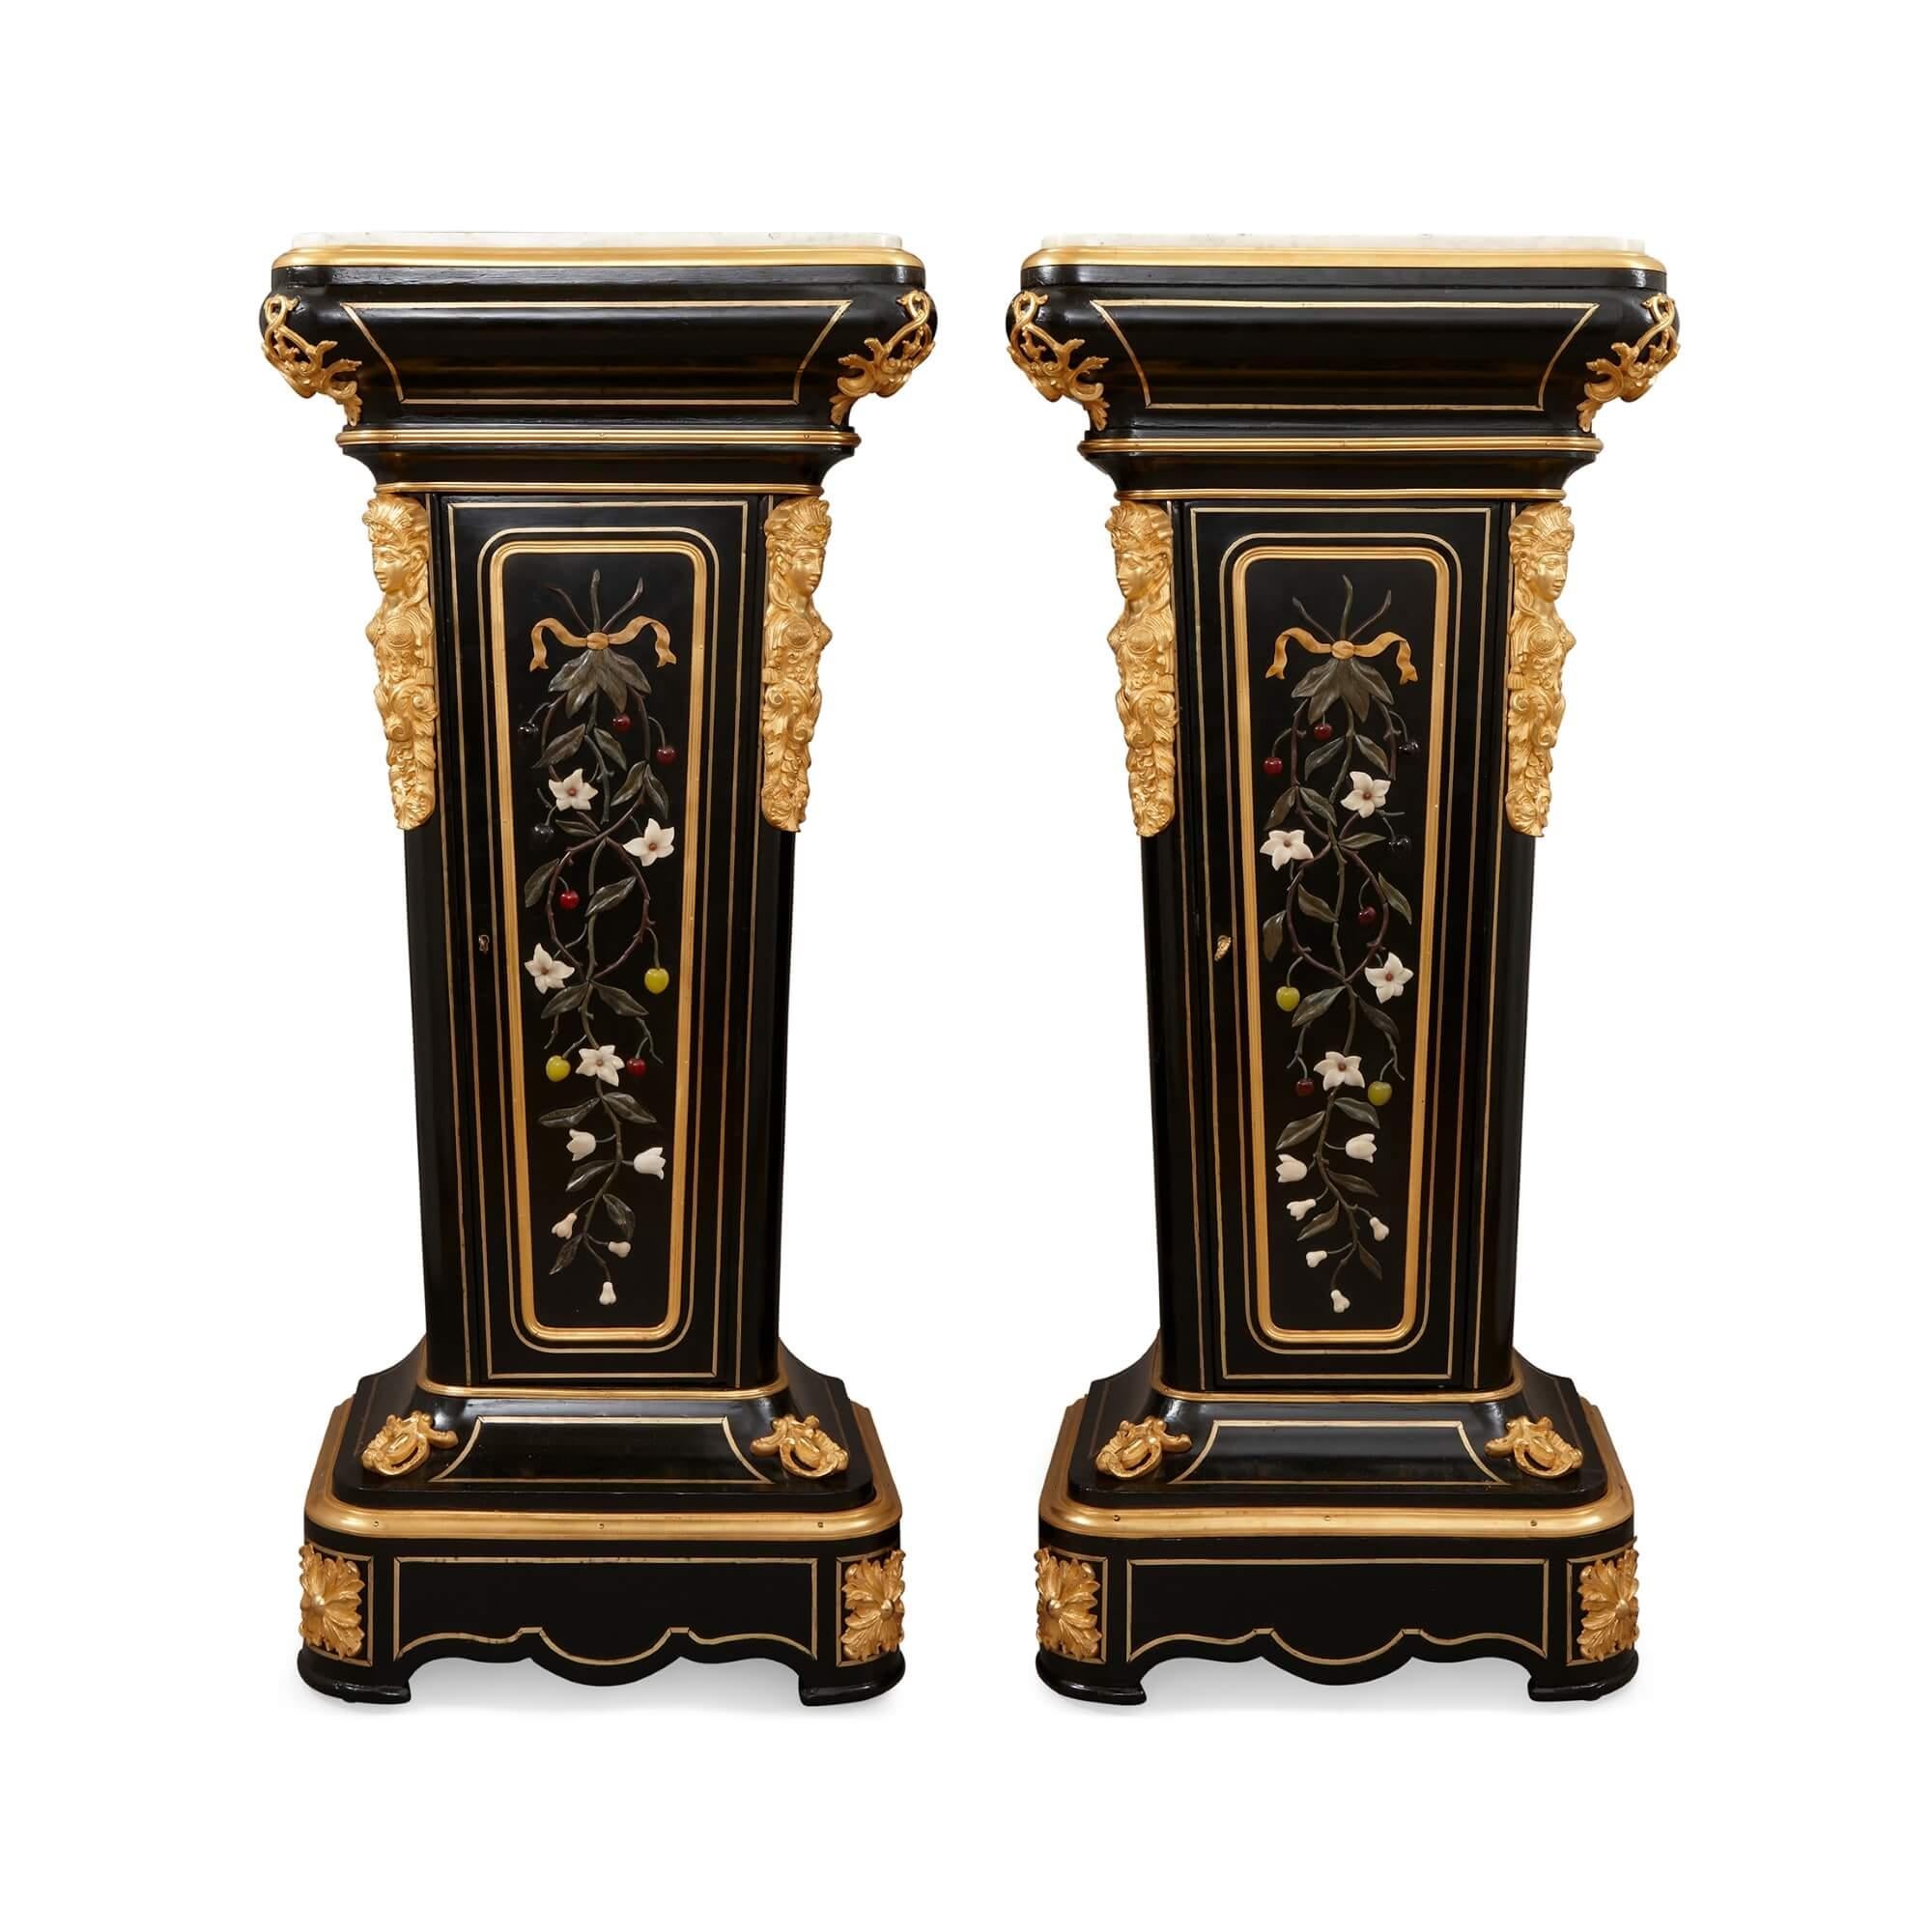 Pair of 19th century hardstone, ormolu and ebonised wood pedestal cabinets
French, 19th Century
Height 138cm, width 64cm, depth 43cm

Originating from the artistic milieu of 19th century France, this pair of pedestal cabinets showcase the era's